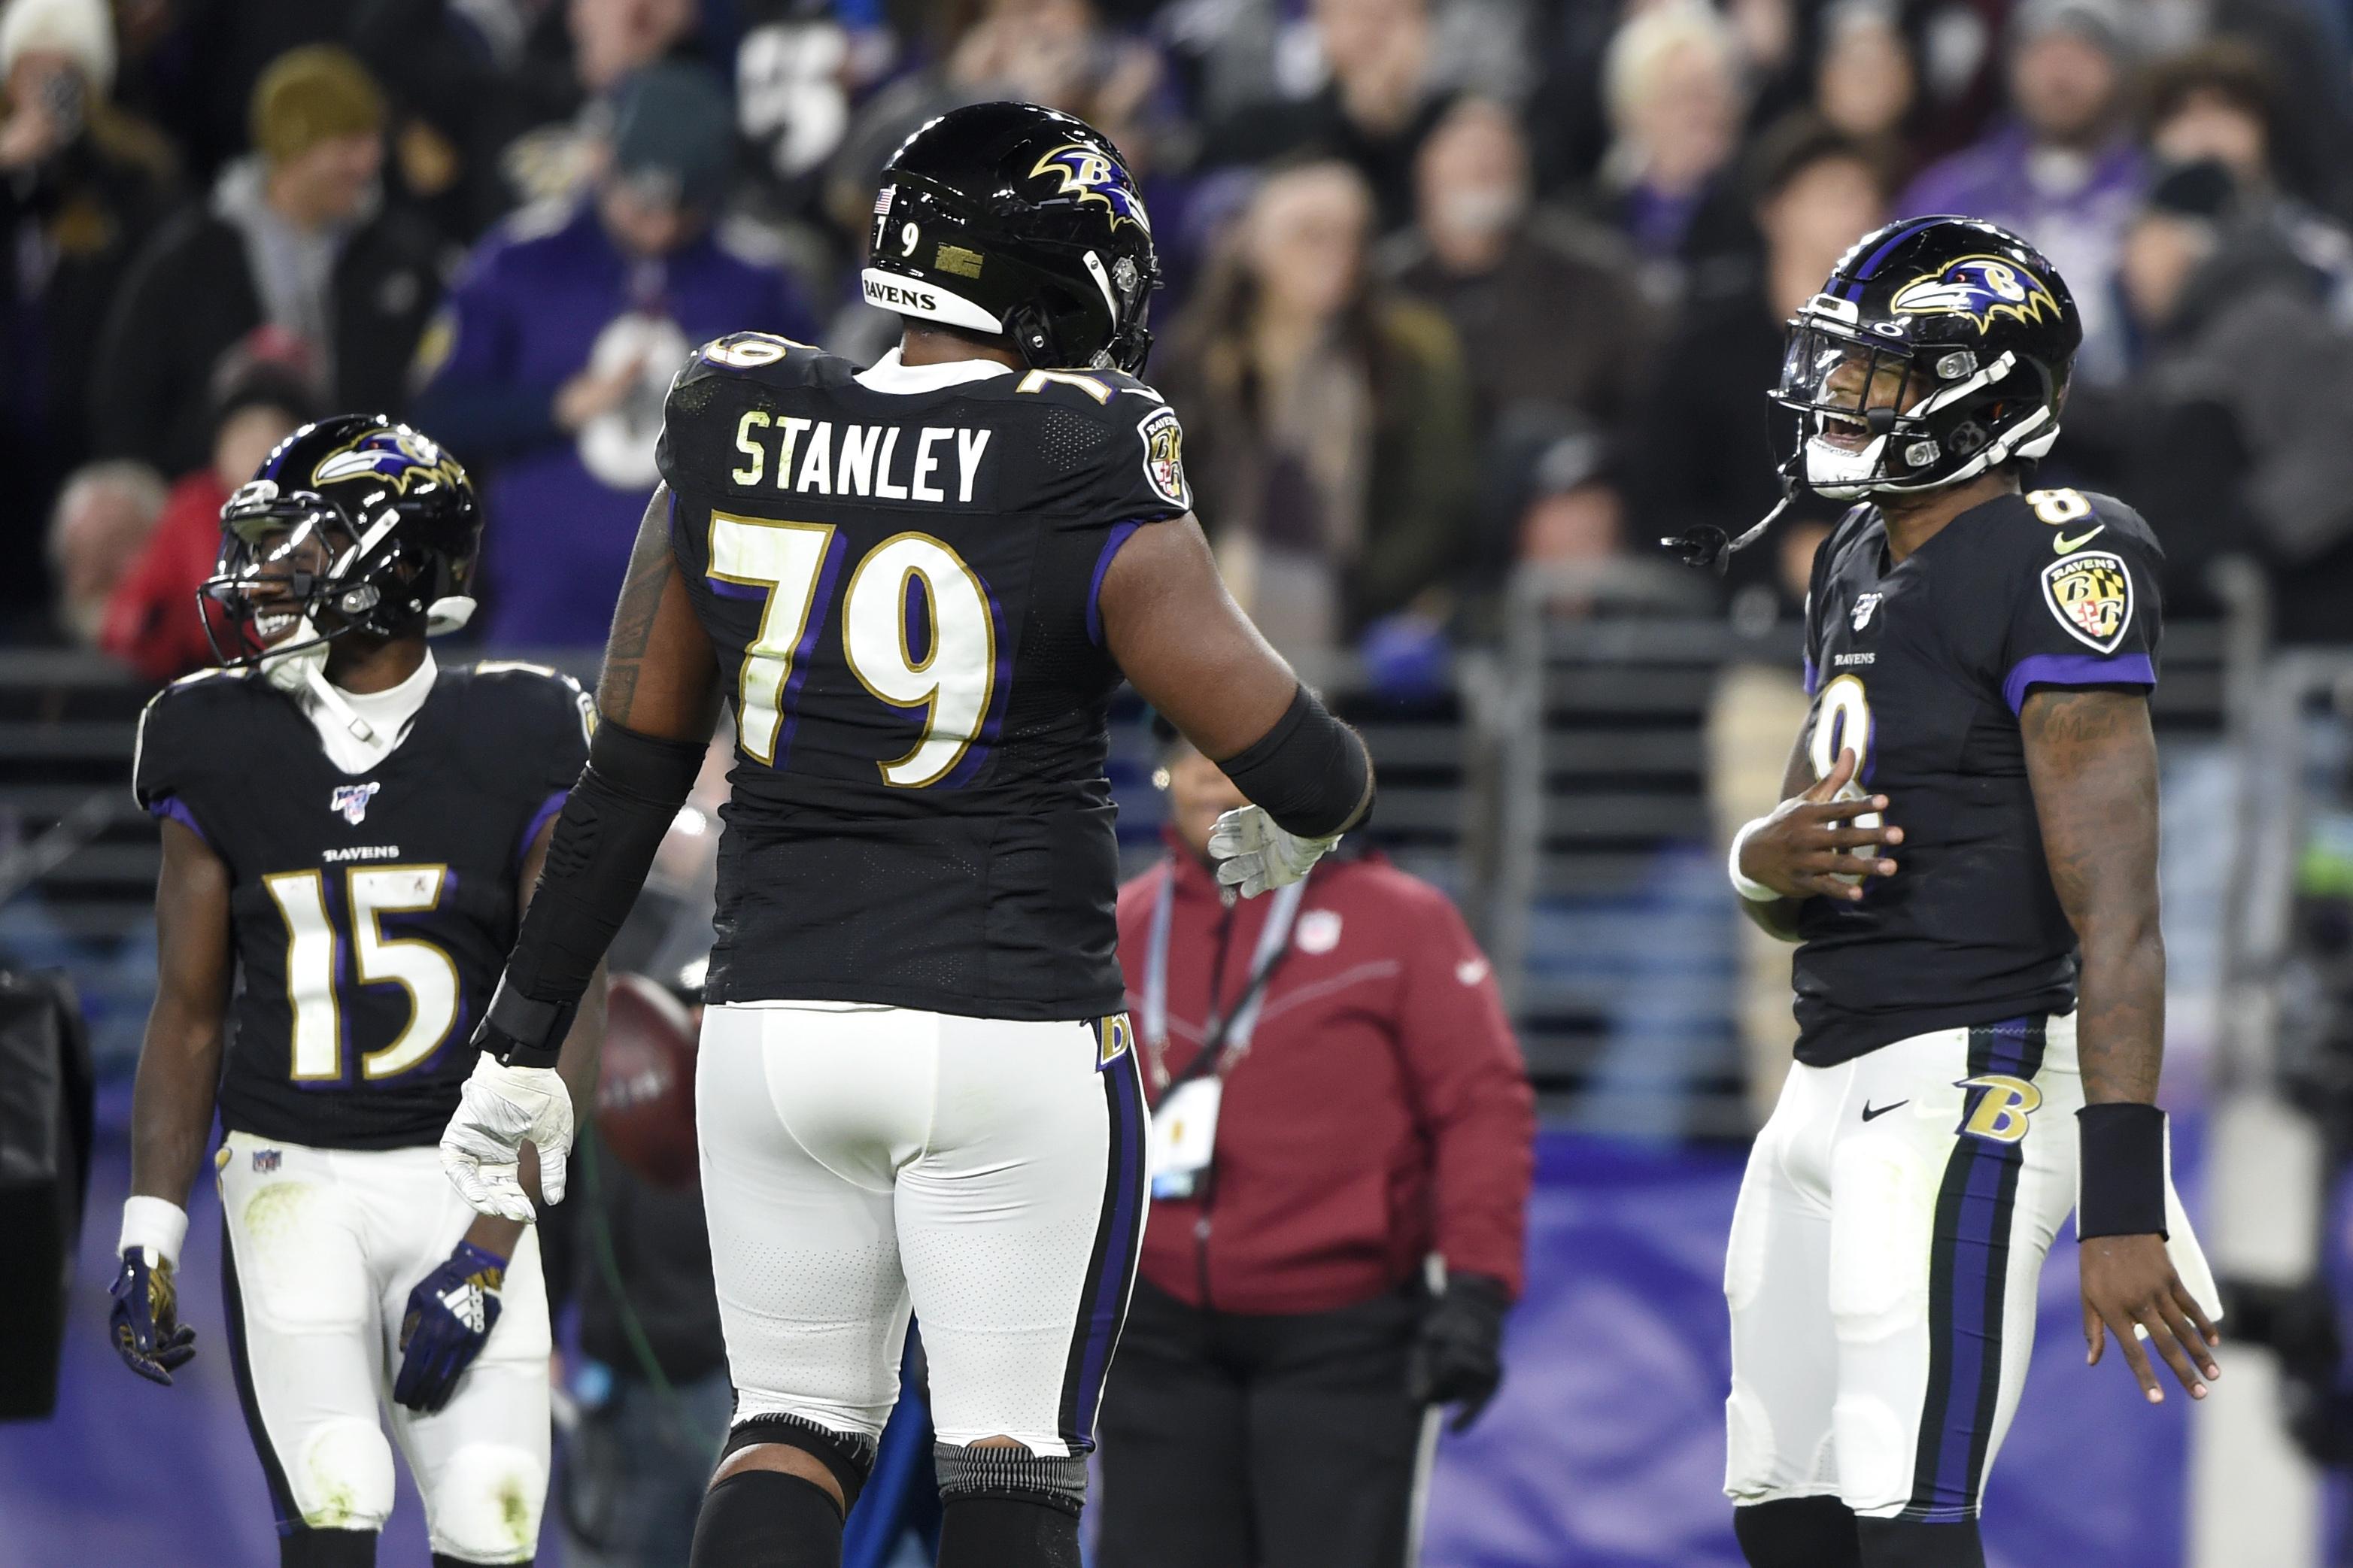 Ronnie Stanley signs five-year extension with Baltimore Ravens